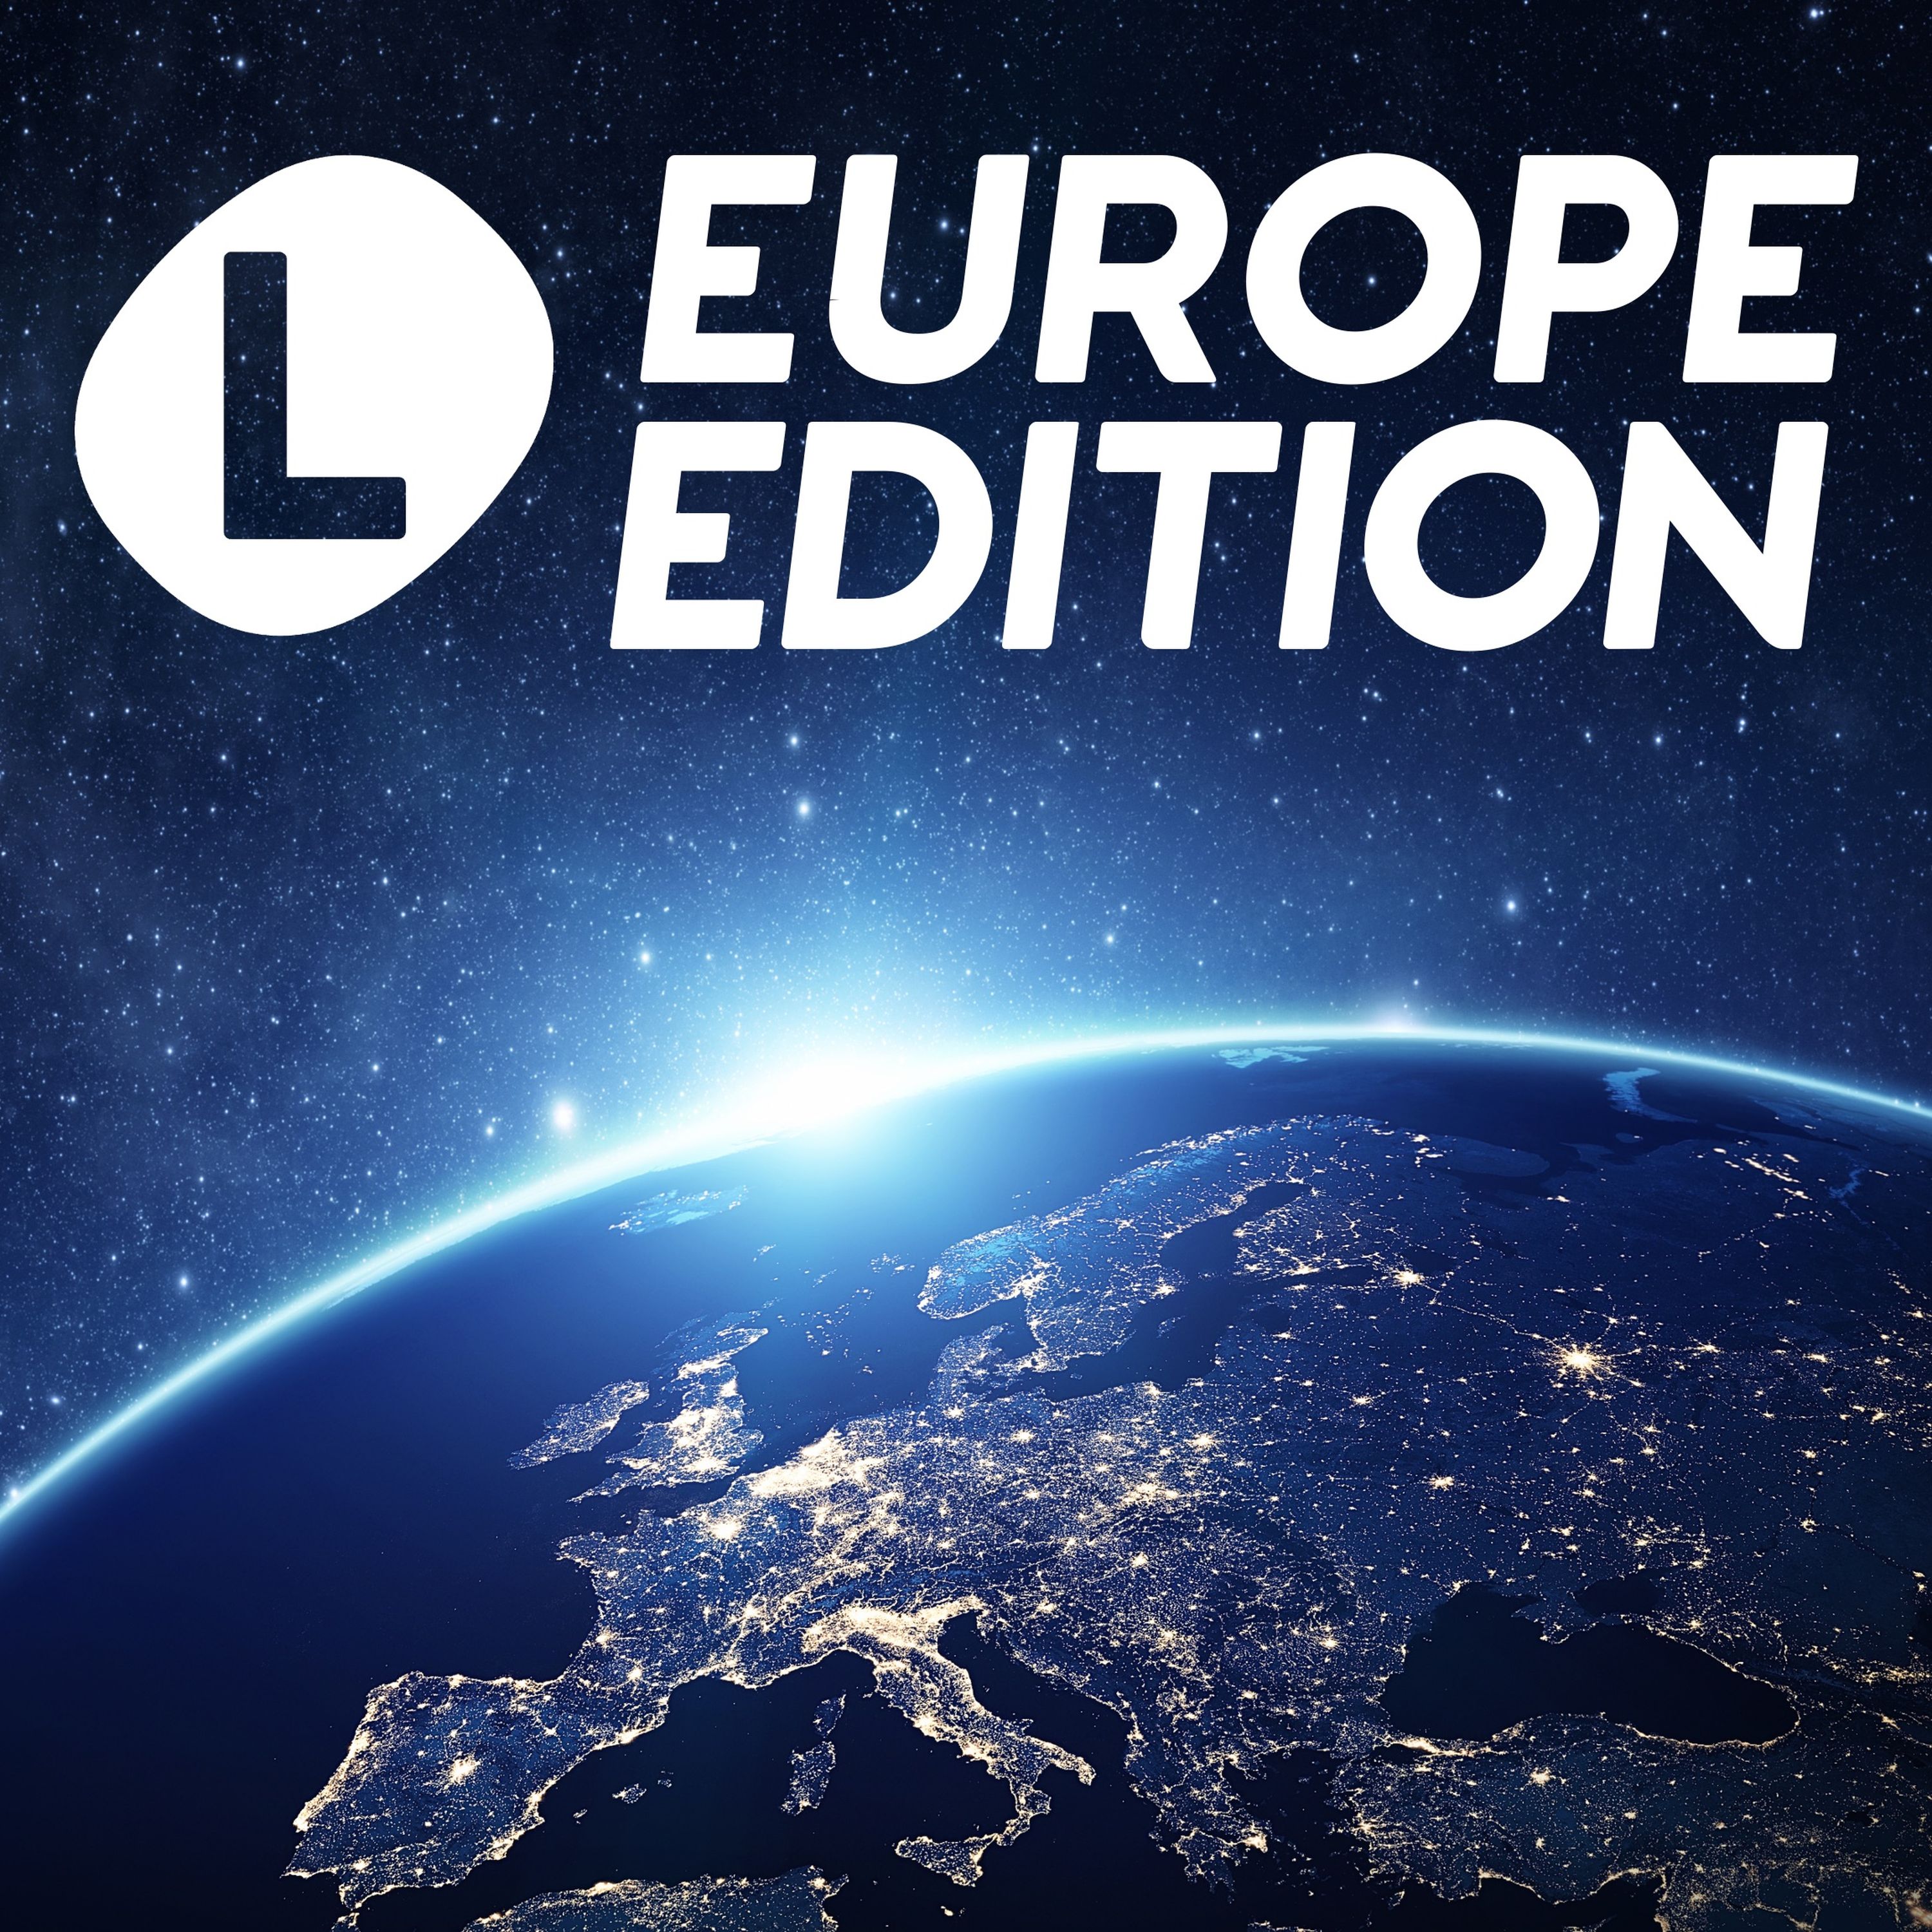 The Local Europe Edition